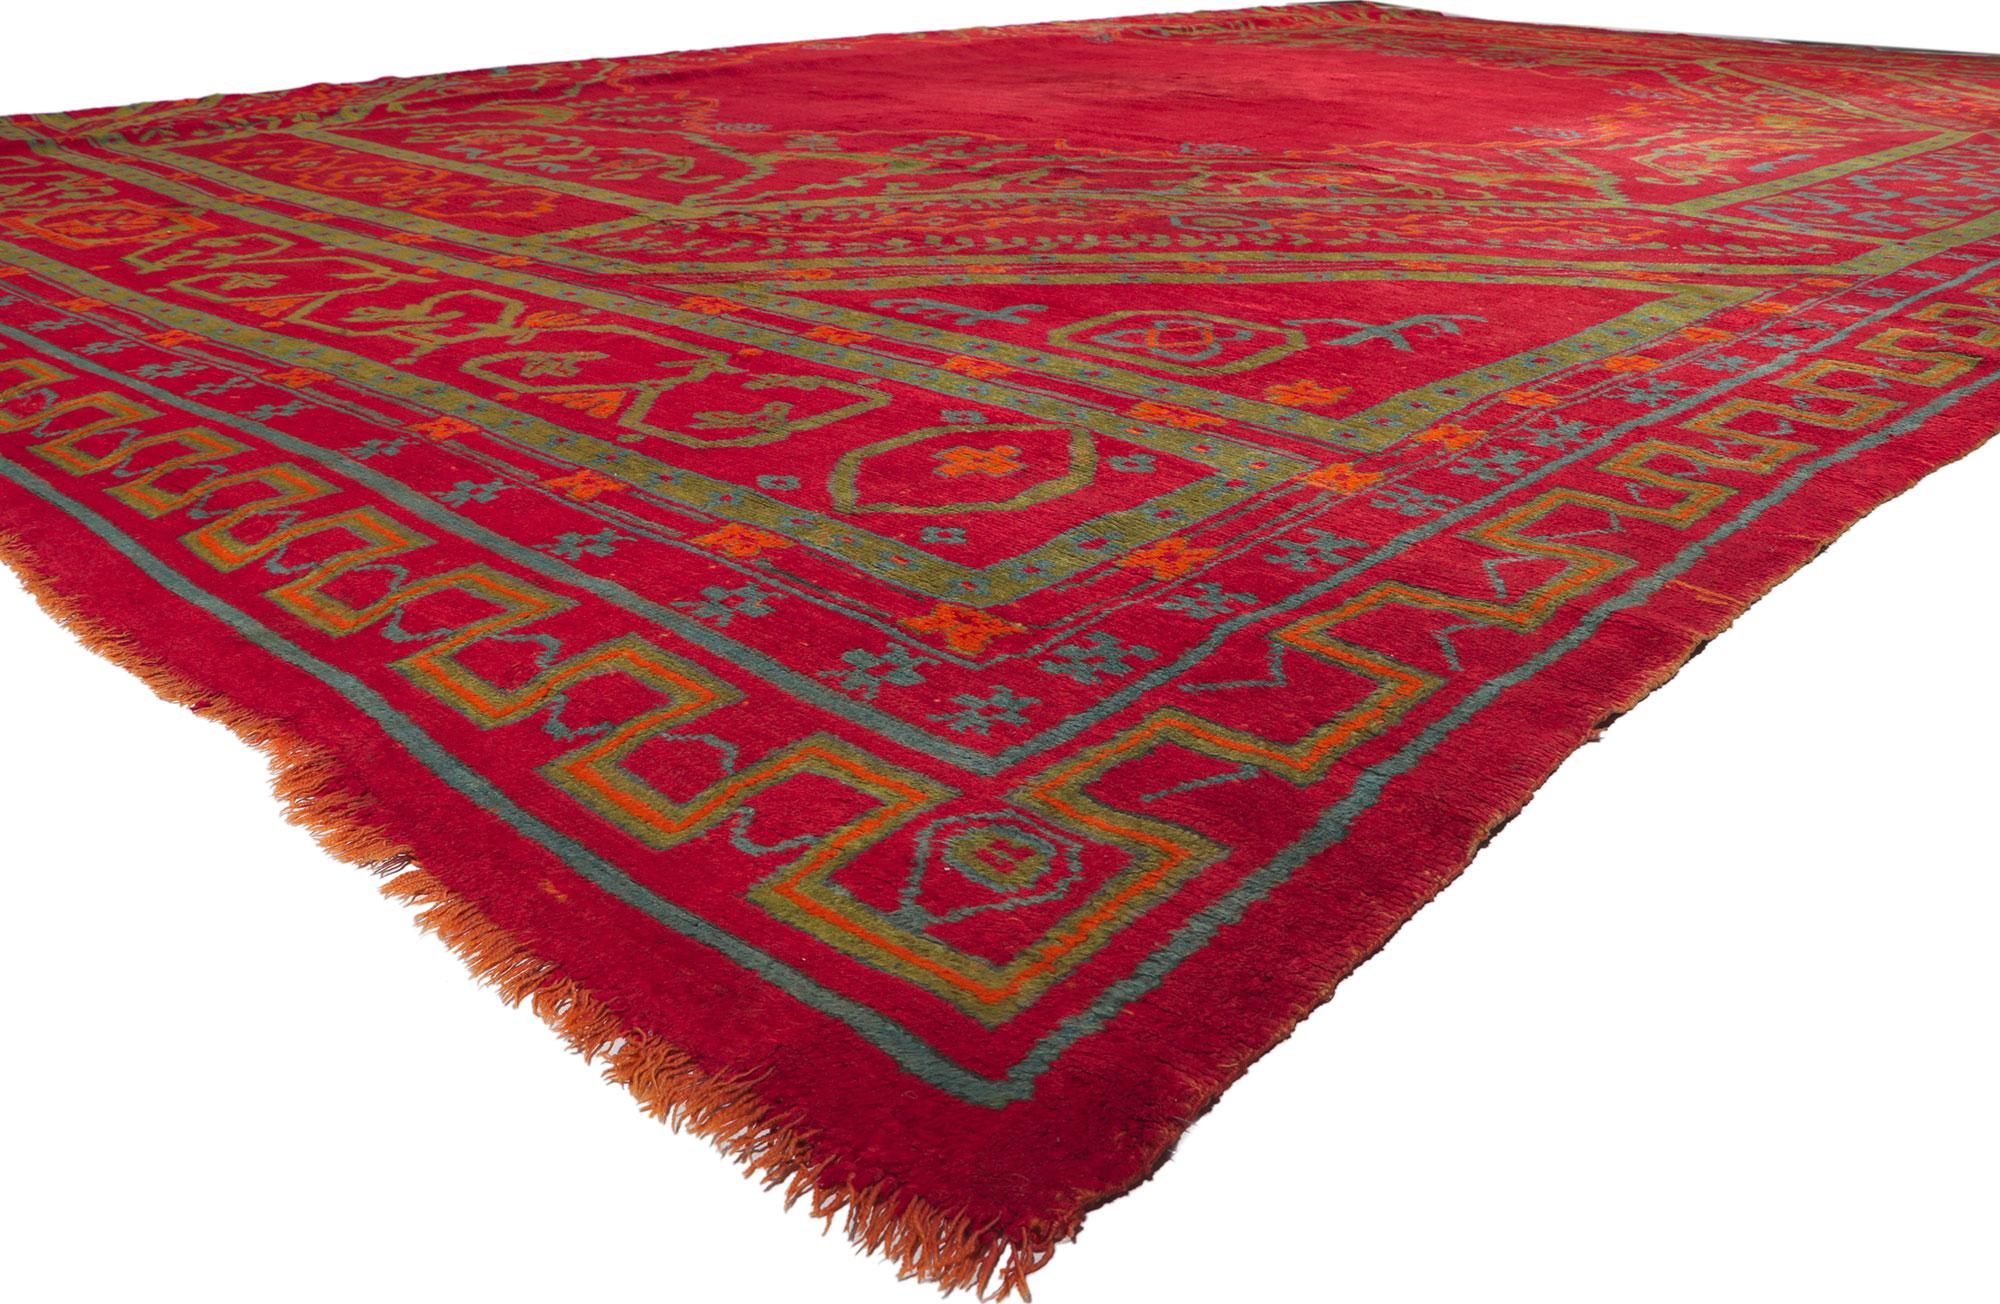 78305 Oversized Antique Turkish Oushak Rug, 20'03 x 25'06.
Abrash. Desirable Age Wear.
Hand knotted wool.
Made in Turkey.
Measures: 20'03 x 25'06.
Hotel Lobby Size Carpet 20 x 26 Rug.
Date: 1890s to 1910s.